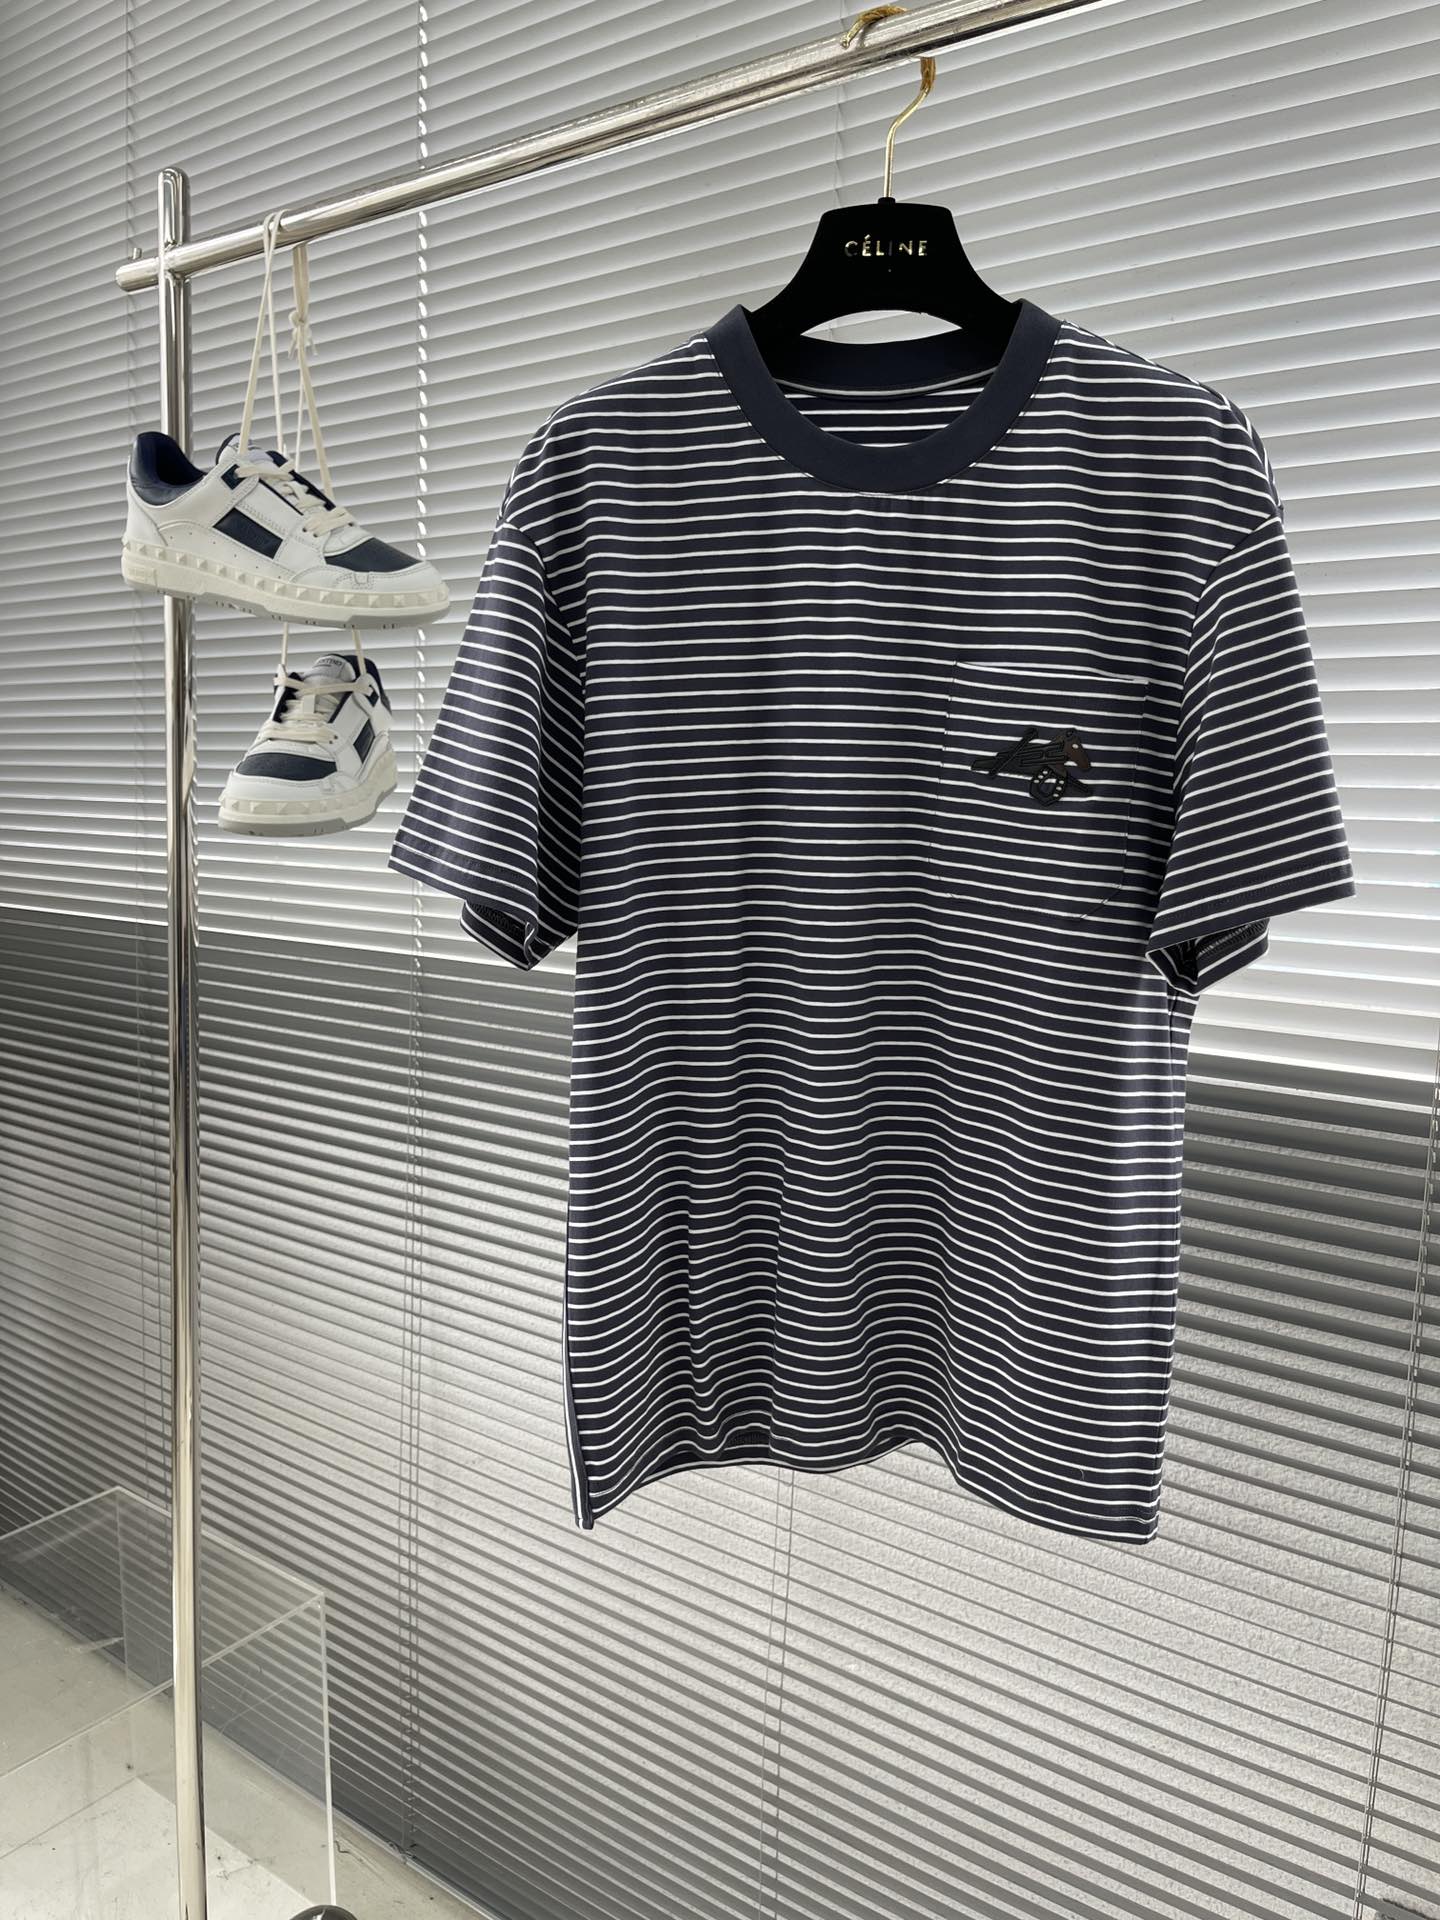 Hermes Clothing T-Shirt Grey White Cotton Spring/Summer Collection